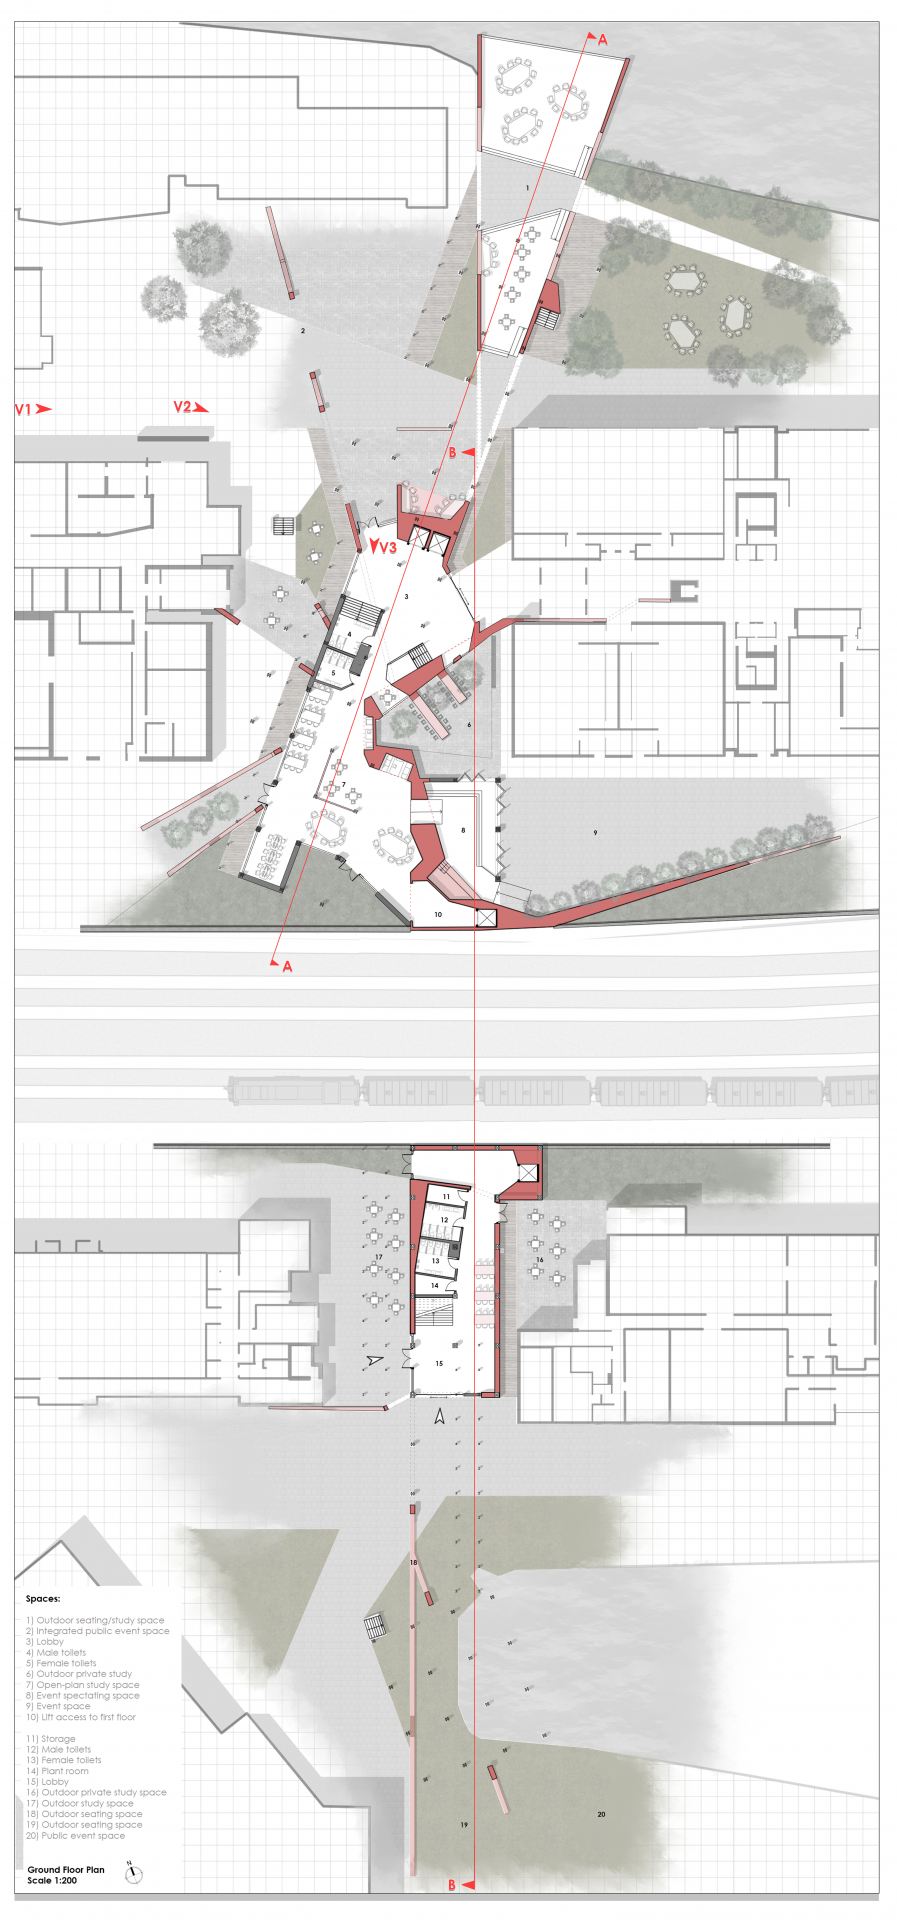 The ground floor plan showing a part journey through the project